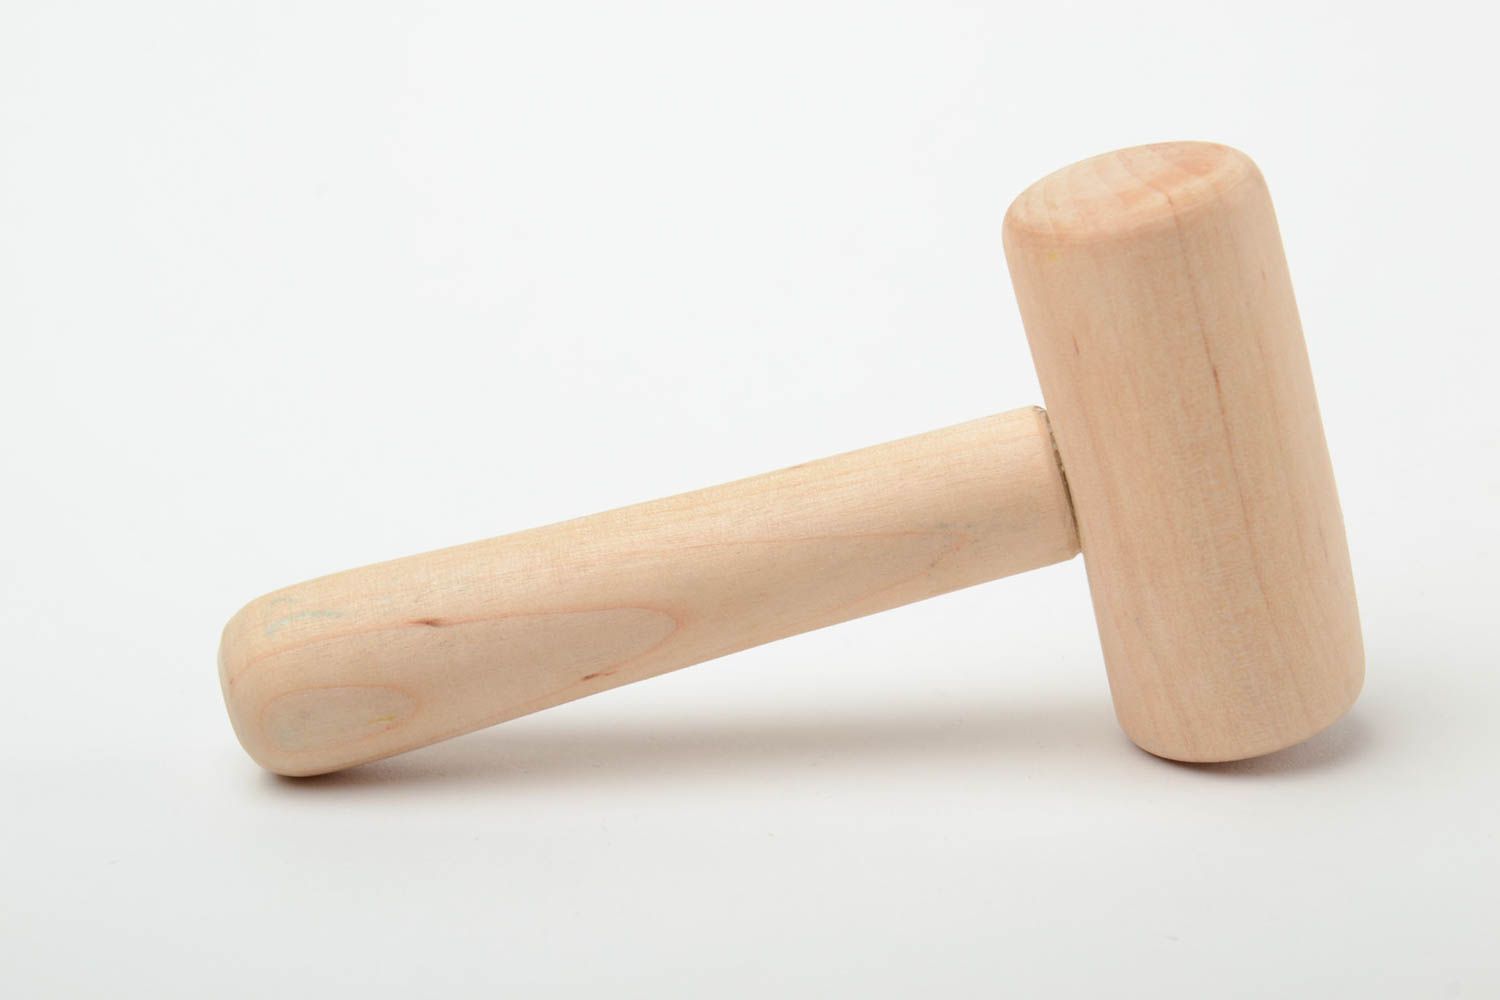 Handmade decorative eco friendly wooden hammer toy for children and interior photo 4